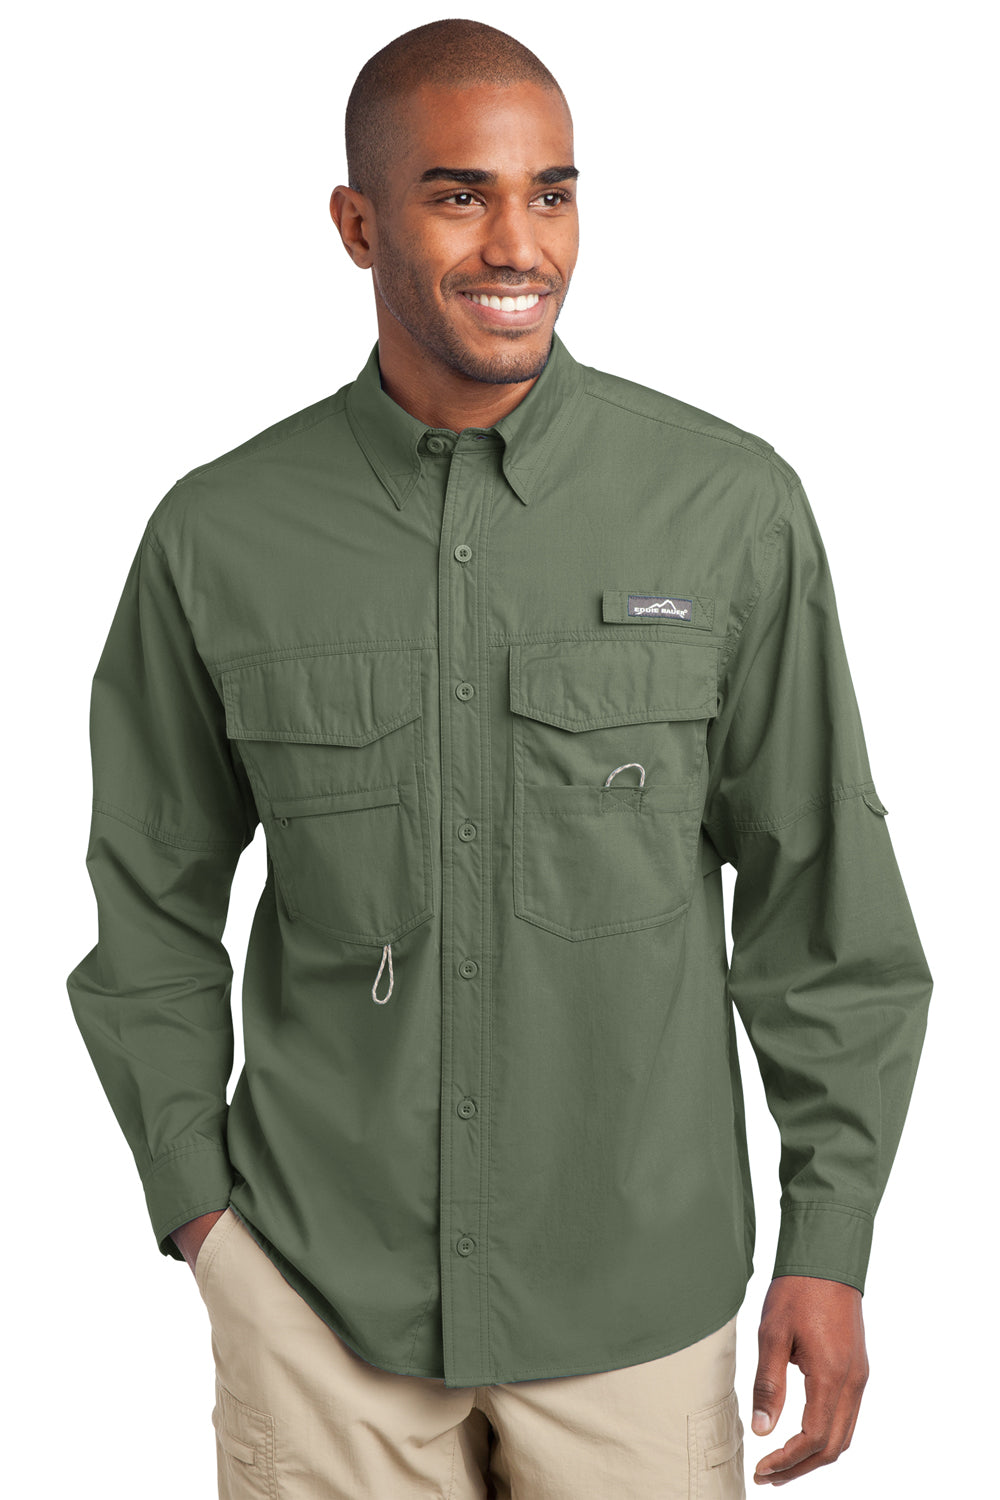 Eddie Bauer Mens Fishing Long Sleeve Button Down Shirt w/ Double Pockets -  Seagrass Green (DISCONTINUED)